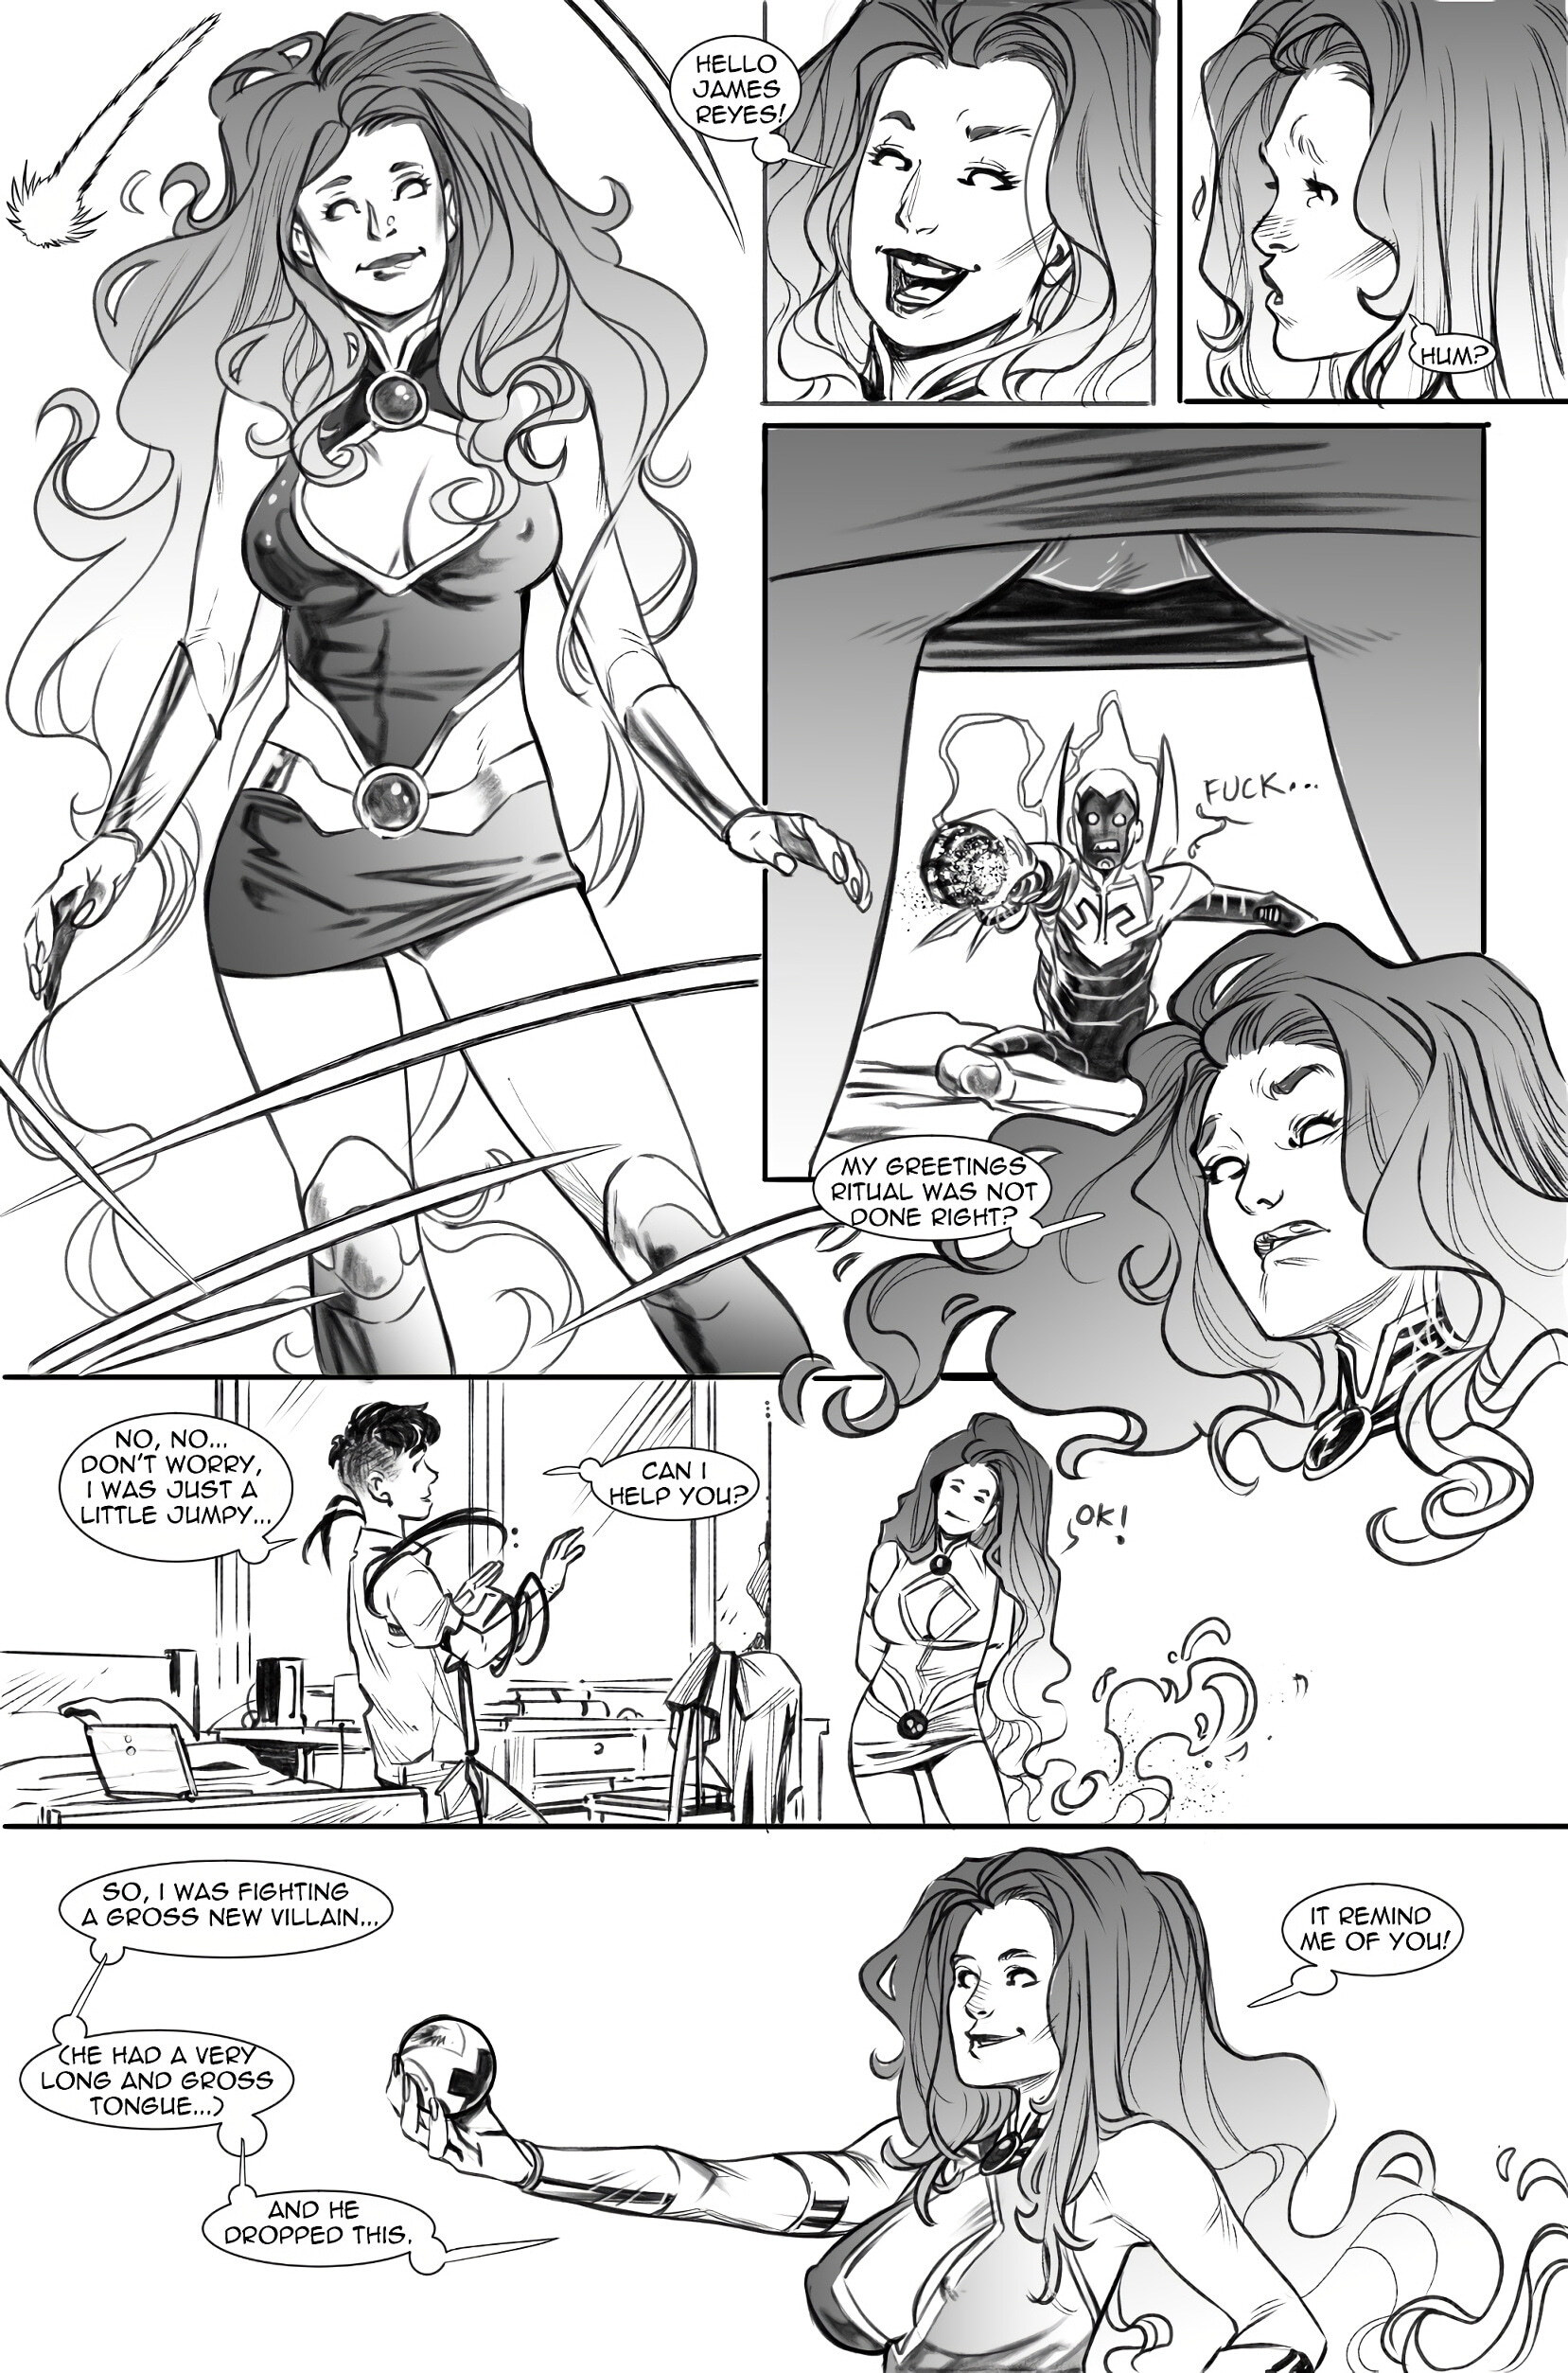 Brave and the Porn 3 - Page 3